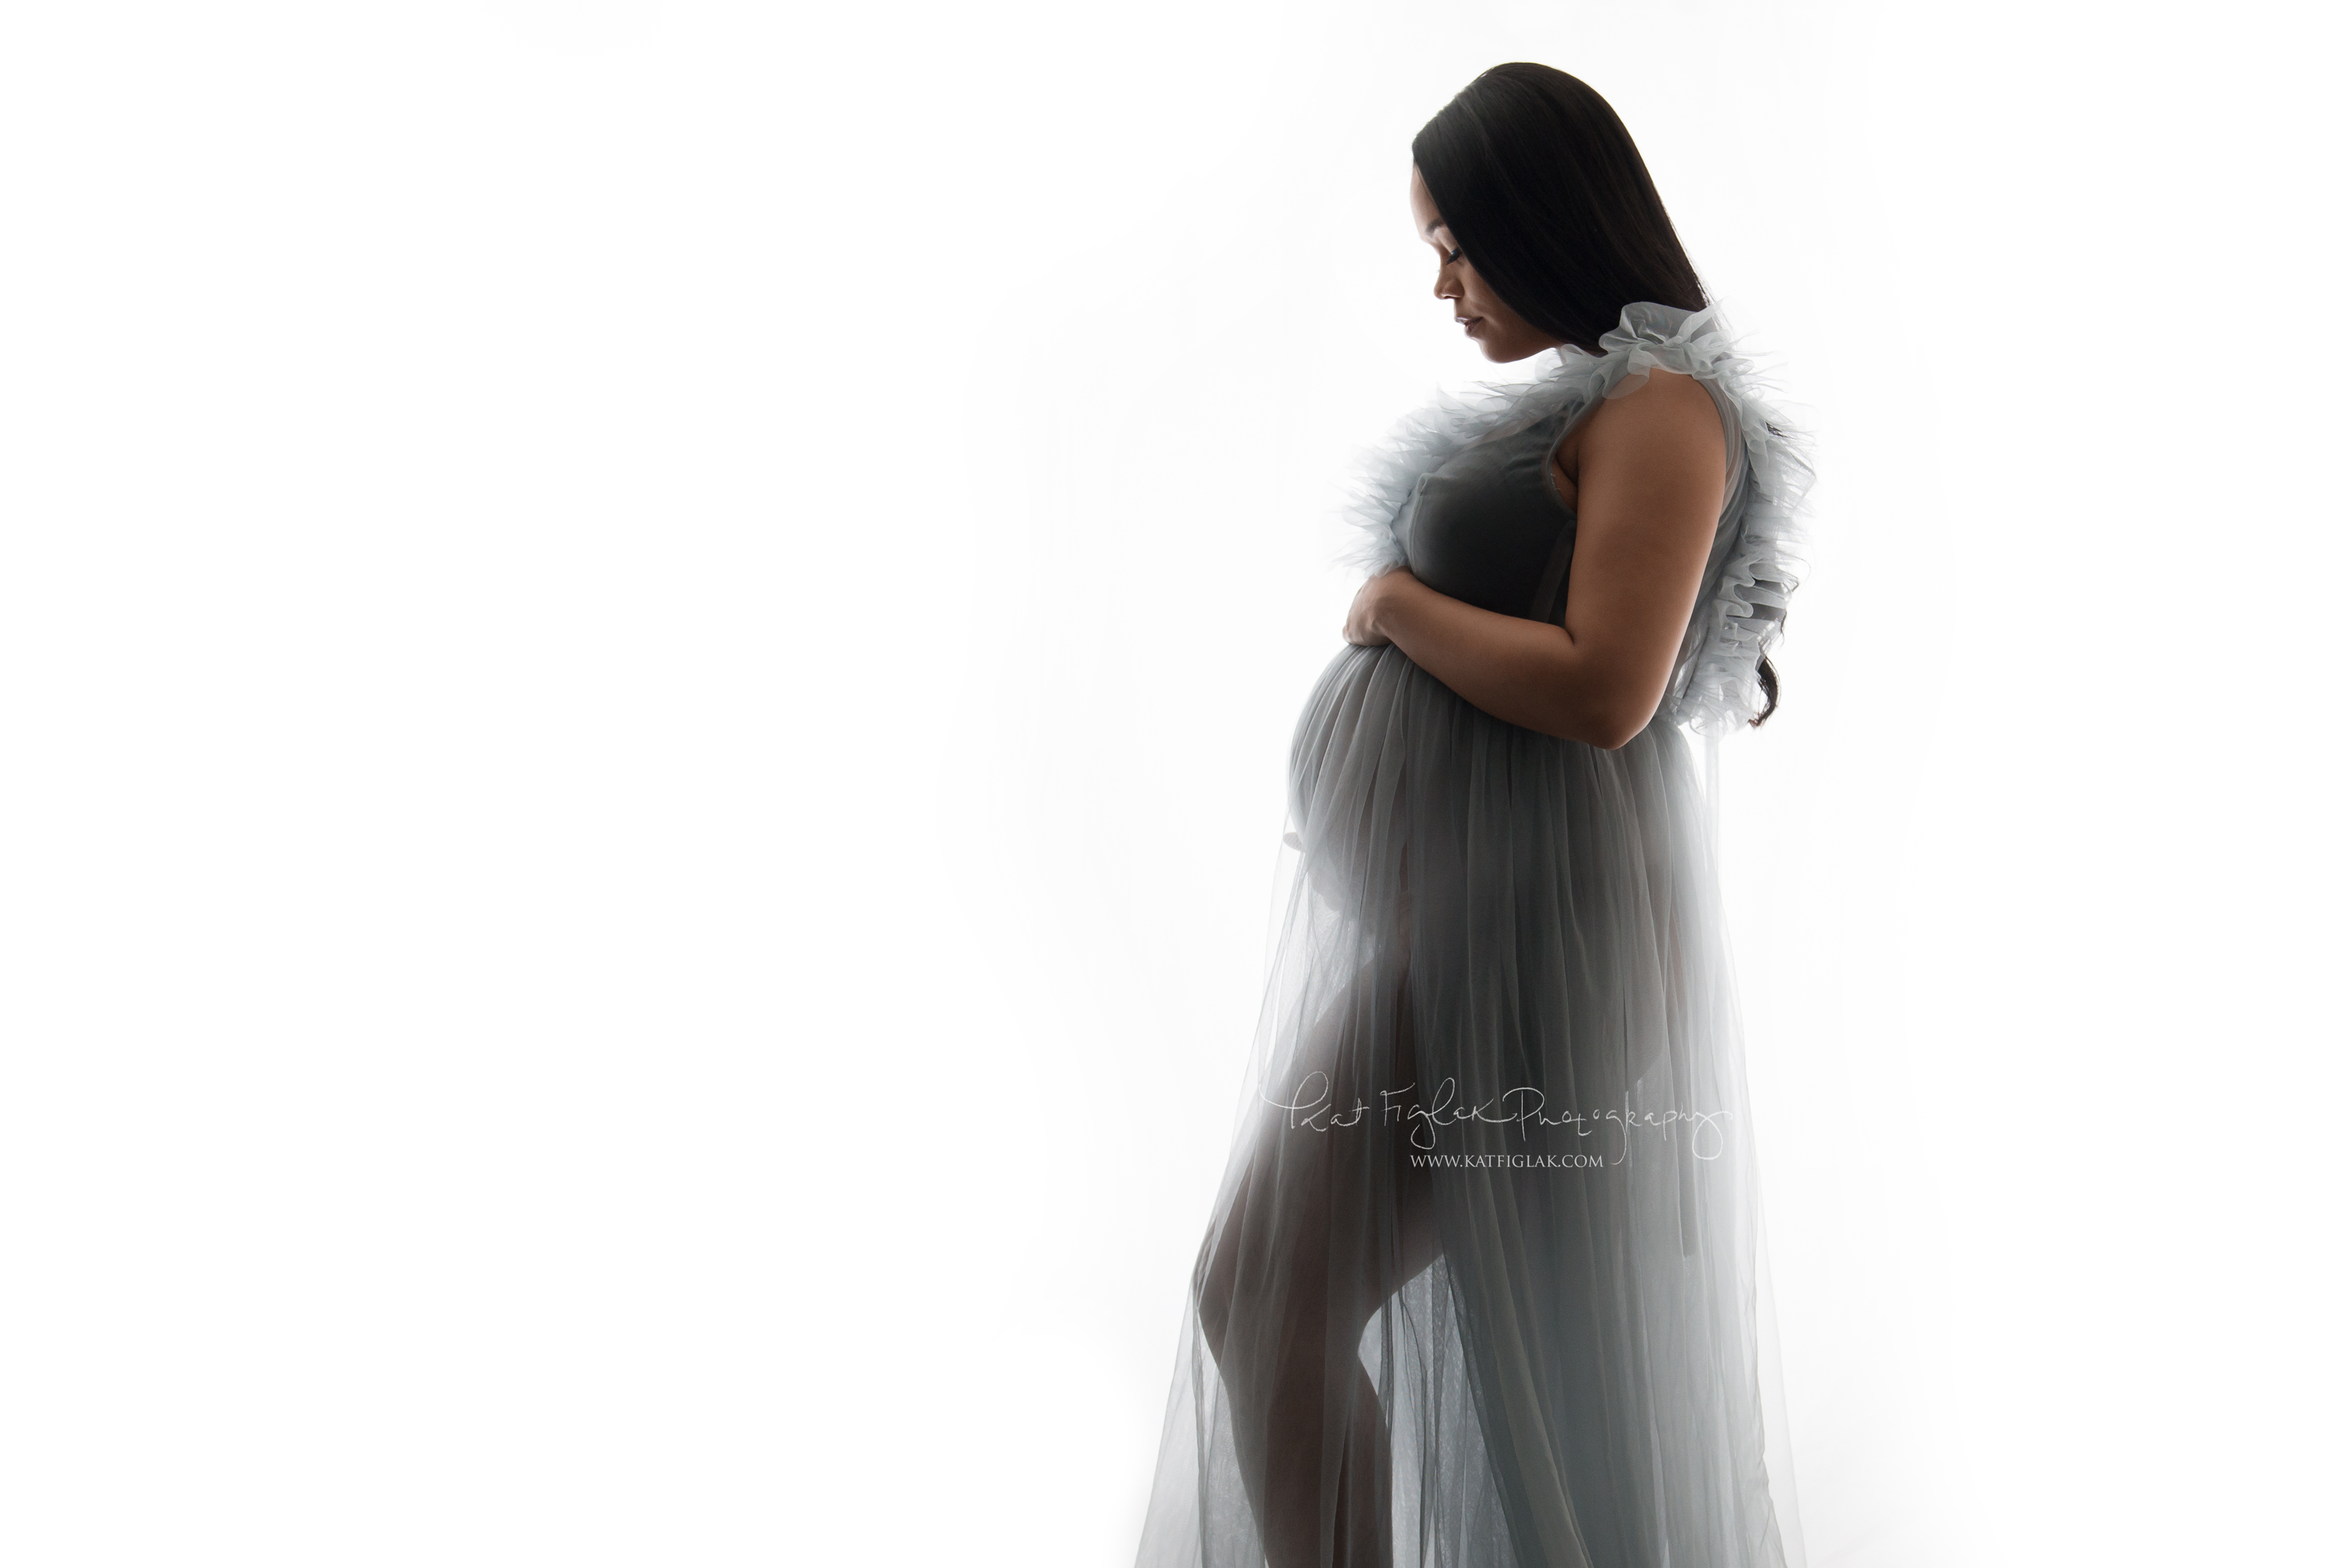 Pregnant woman standing looking at her belly wearing a shear gray gown with light coming in from the background